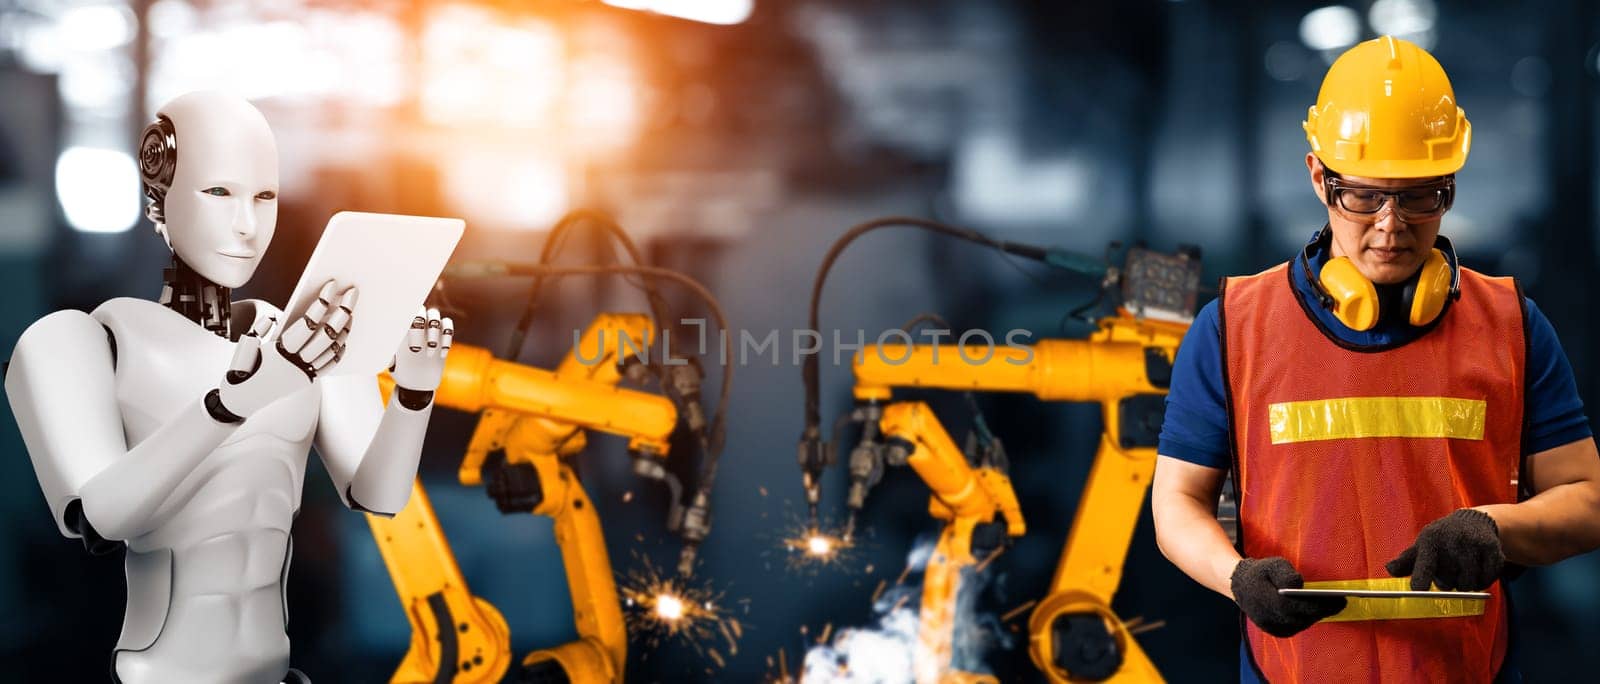 MLP Mechanized industry robot and human worker working together in future factory. Concept of artificial intelligence for industrial revolution and automation manufacturing process.